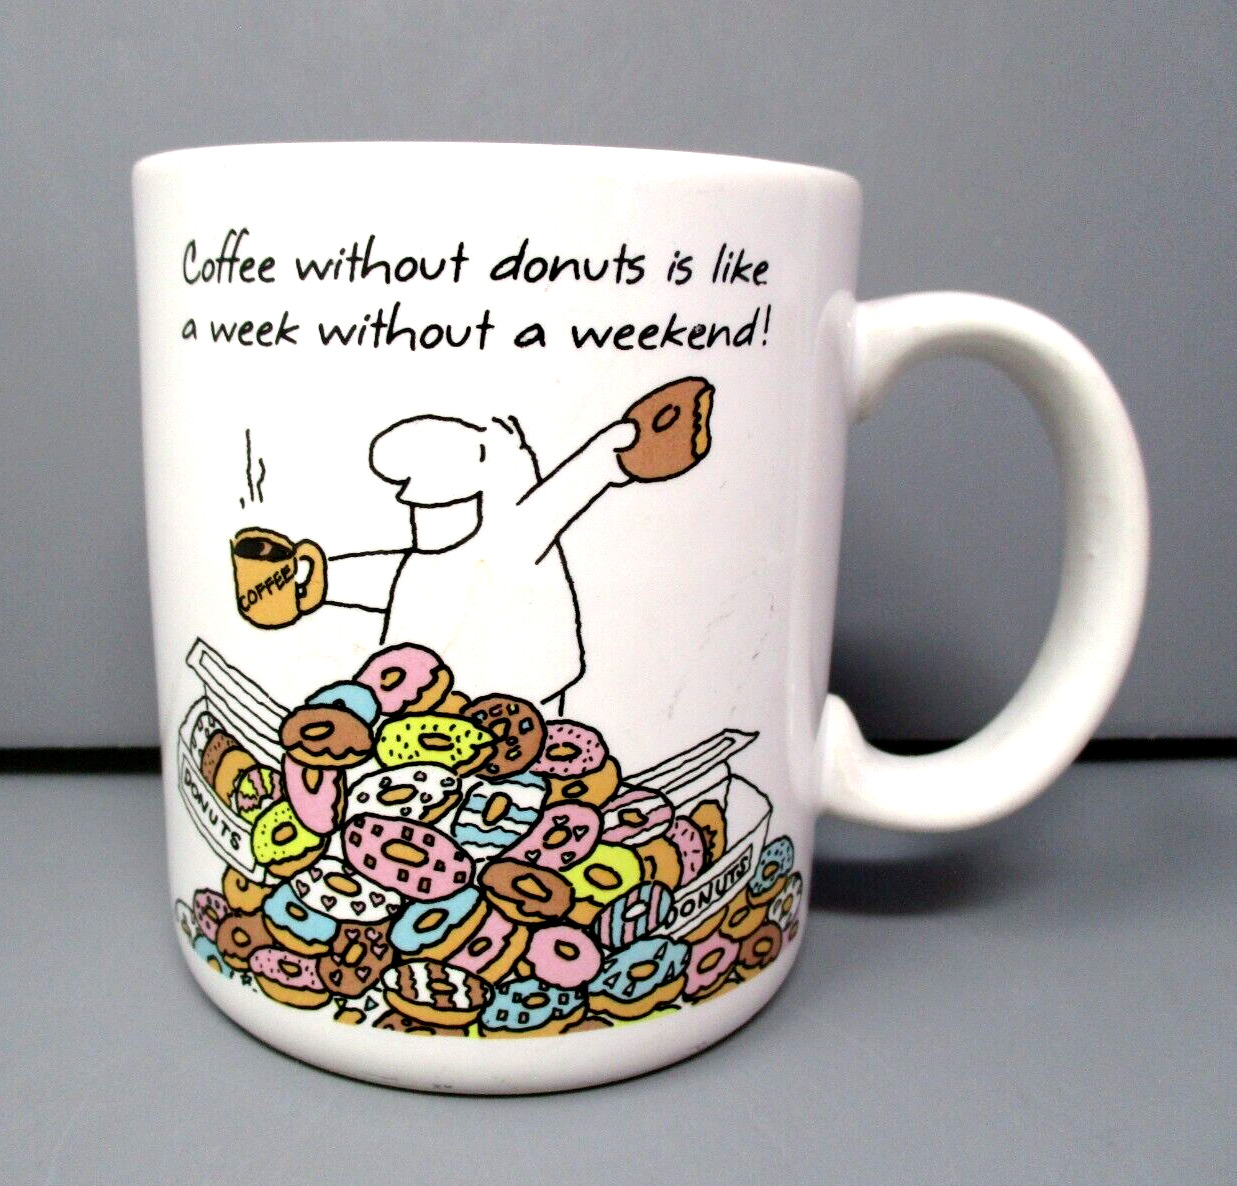 Vintage Hallmark Mug Coffee Without Donuts Week Without Weekend made Japan Funny